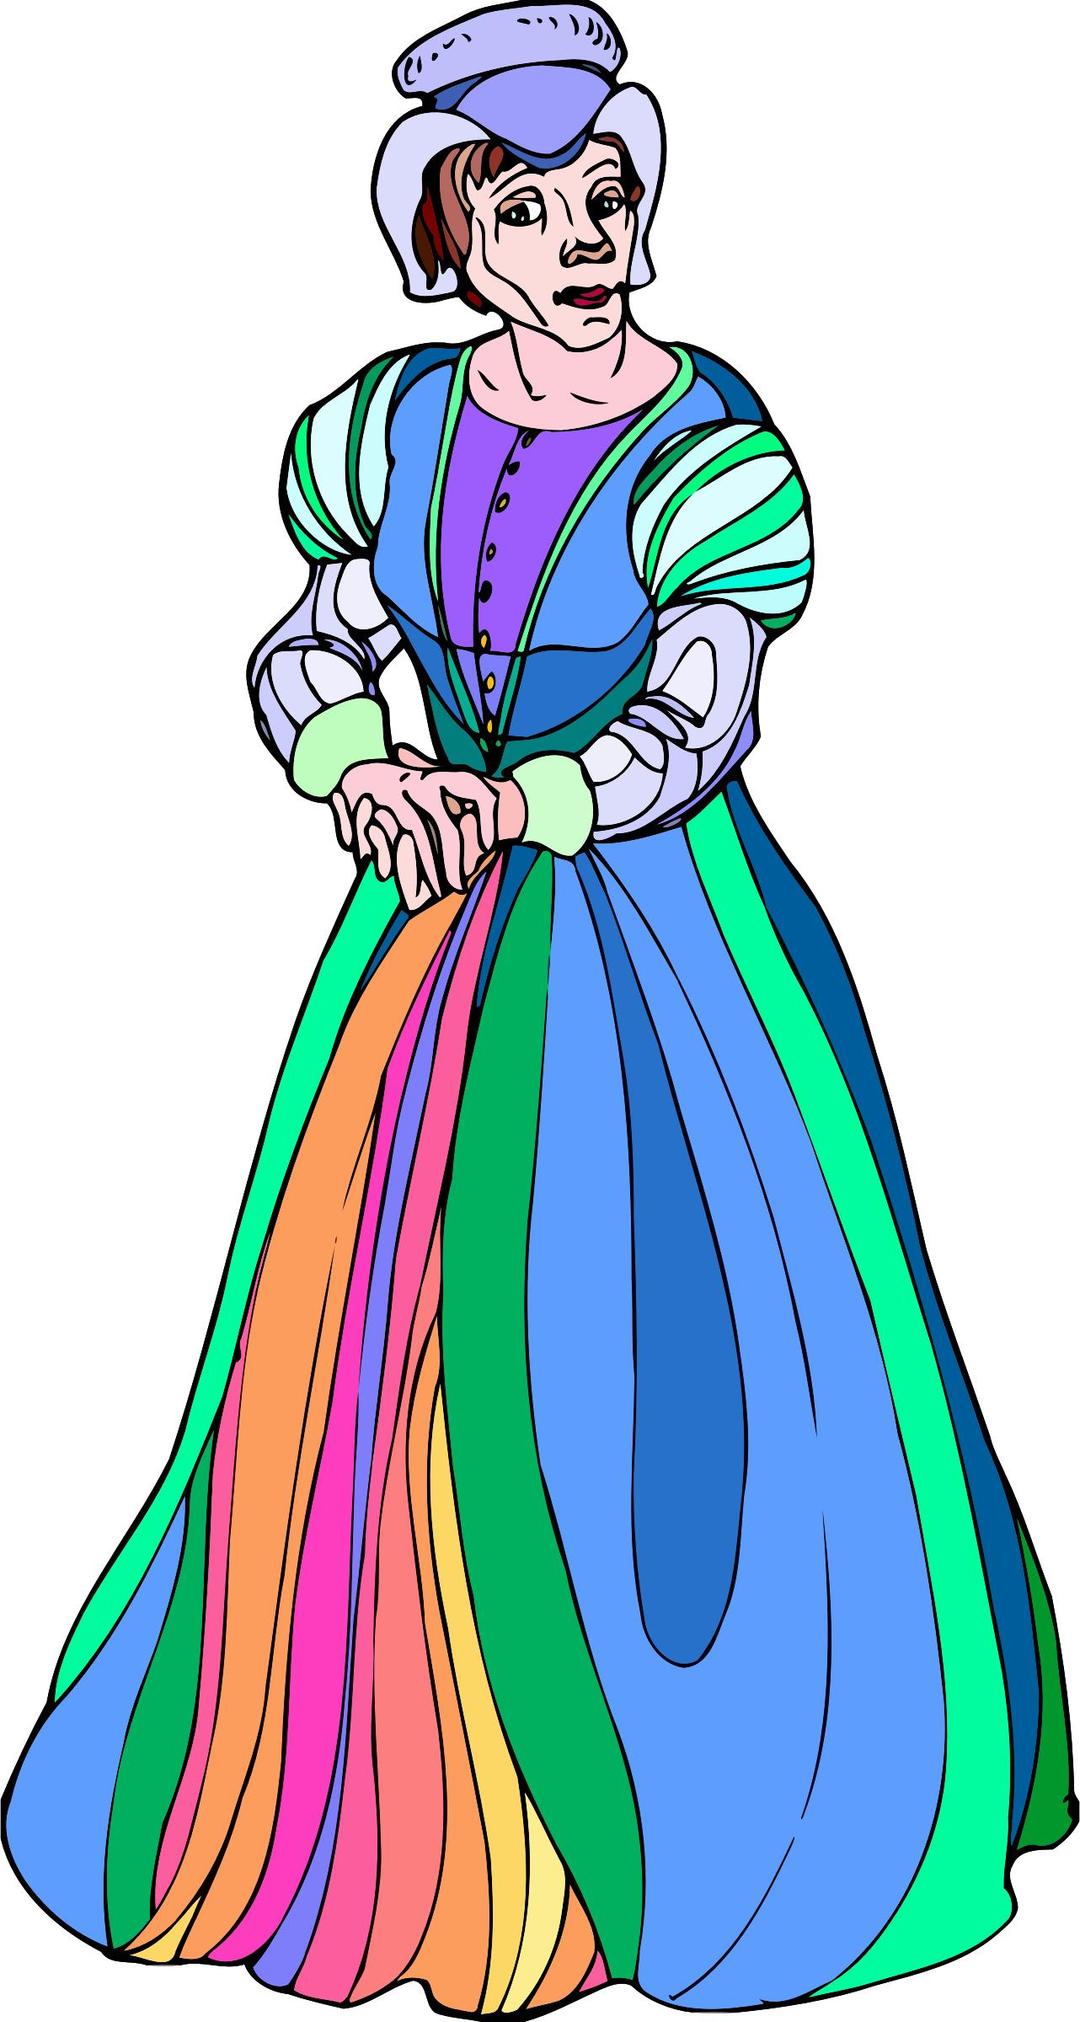 Shakespeare characters - Lady Macbeth 2 (colour) png transparent